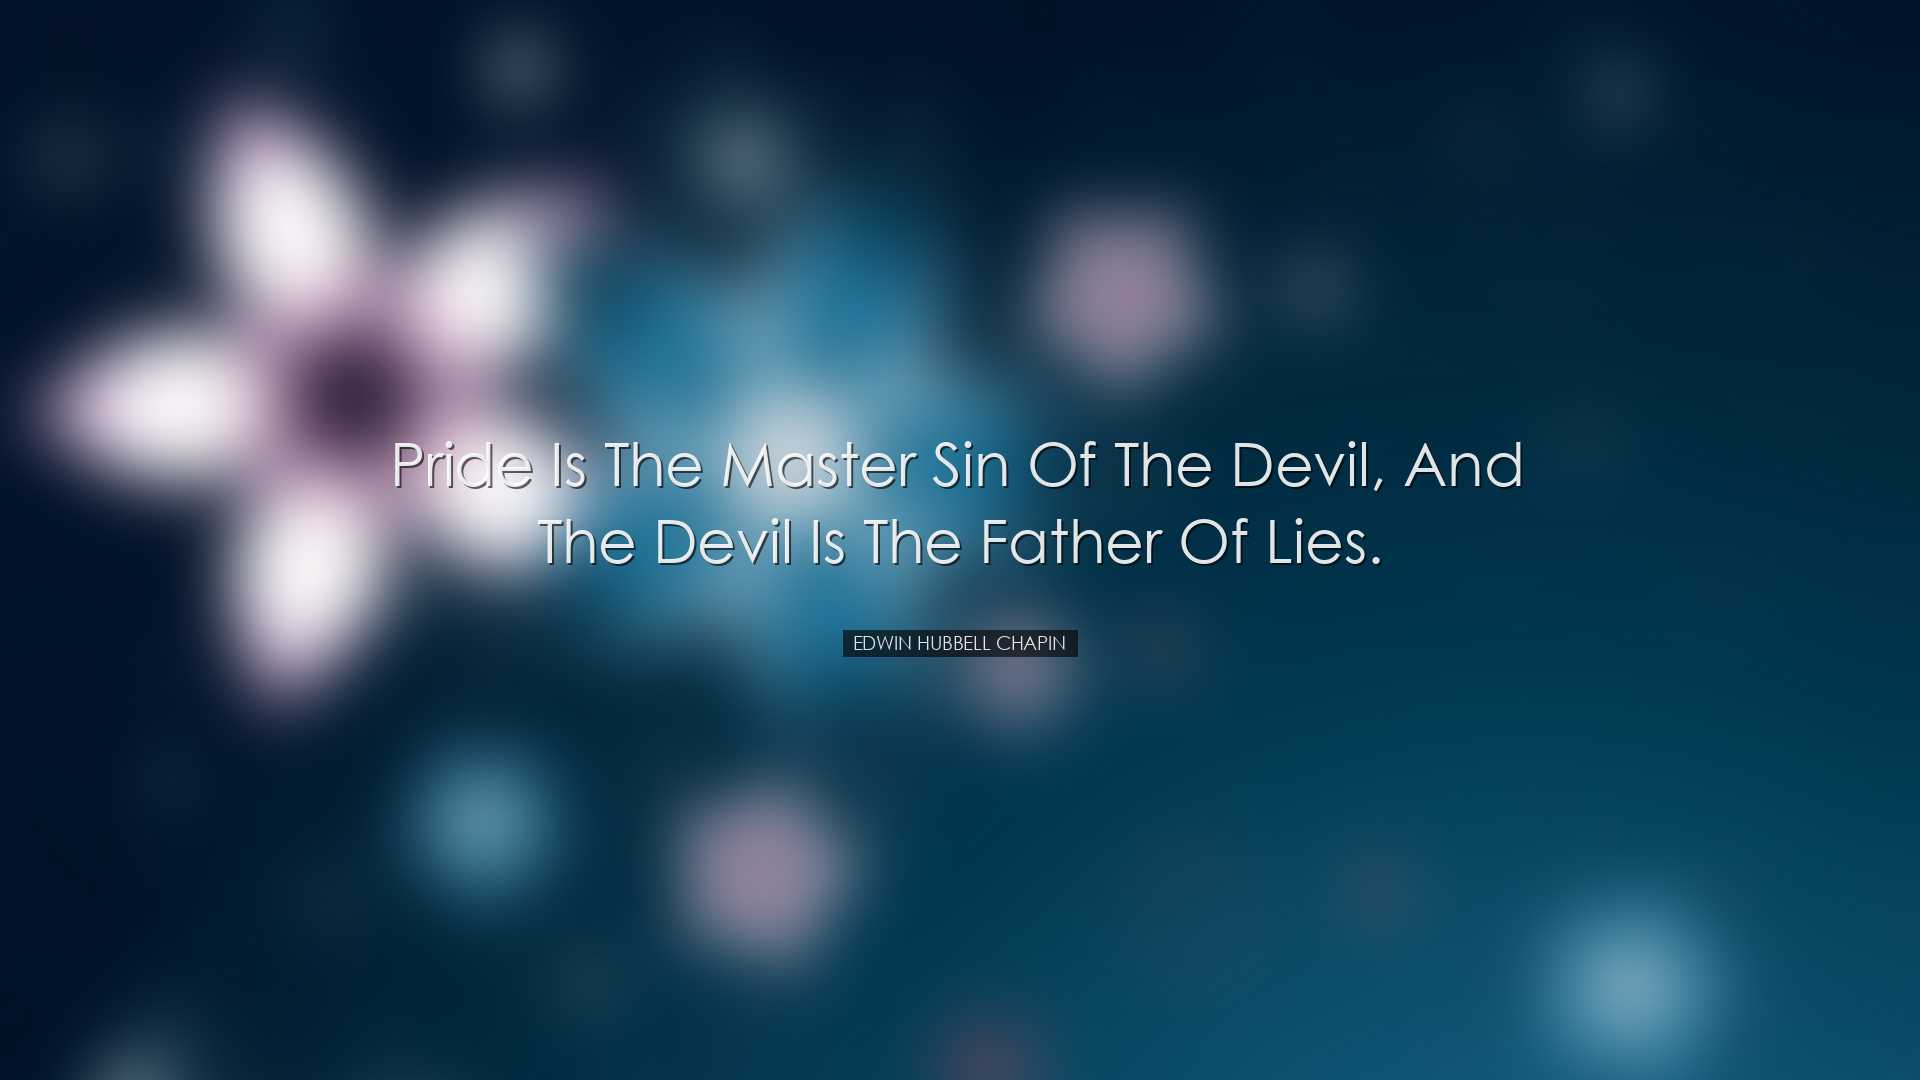 Pride is the master sin of the devil, and the devil is the father